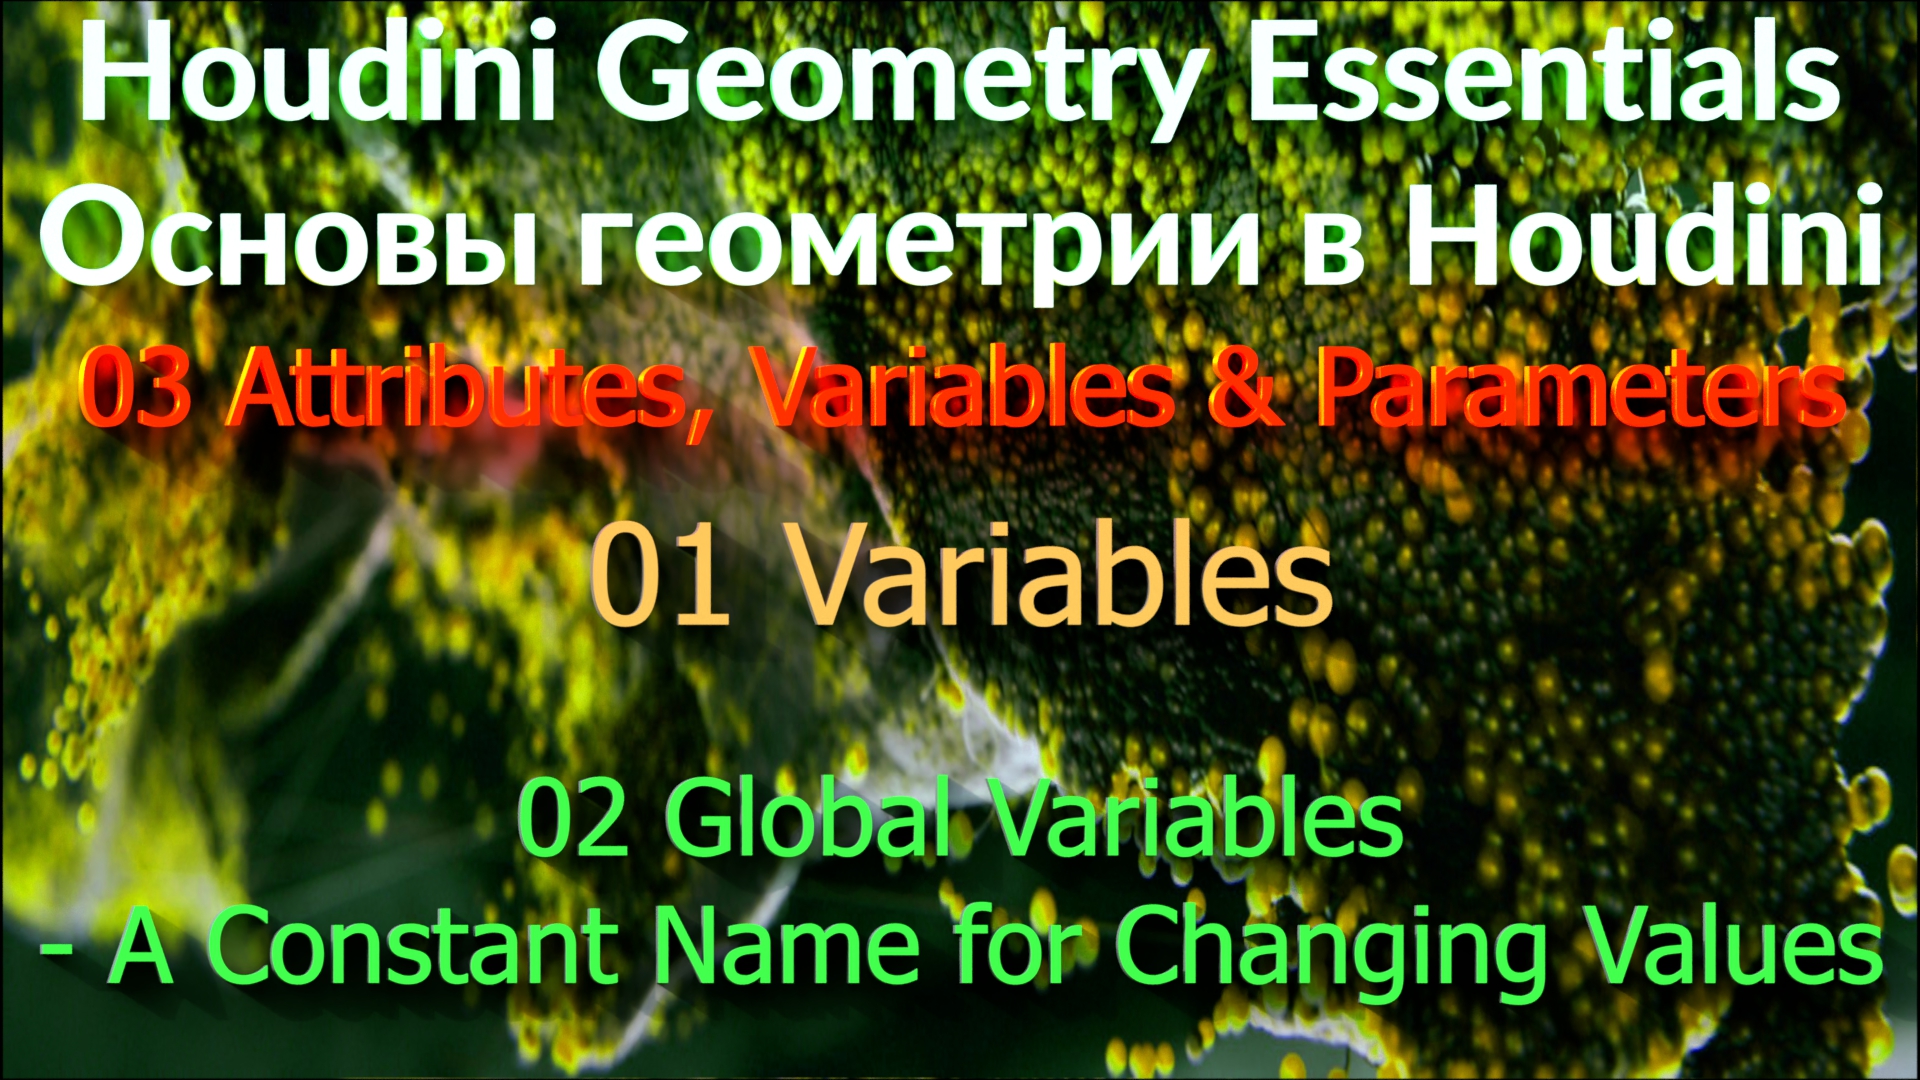 03_01_02 Global Variables - A Constant Name for Changing Values